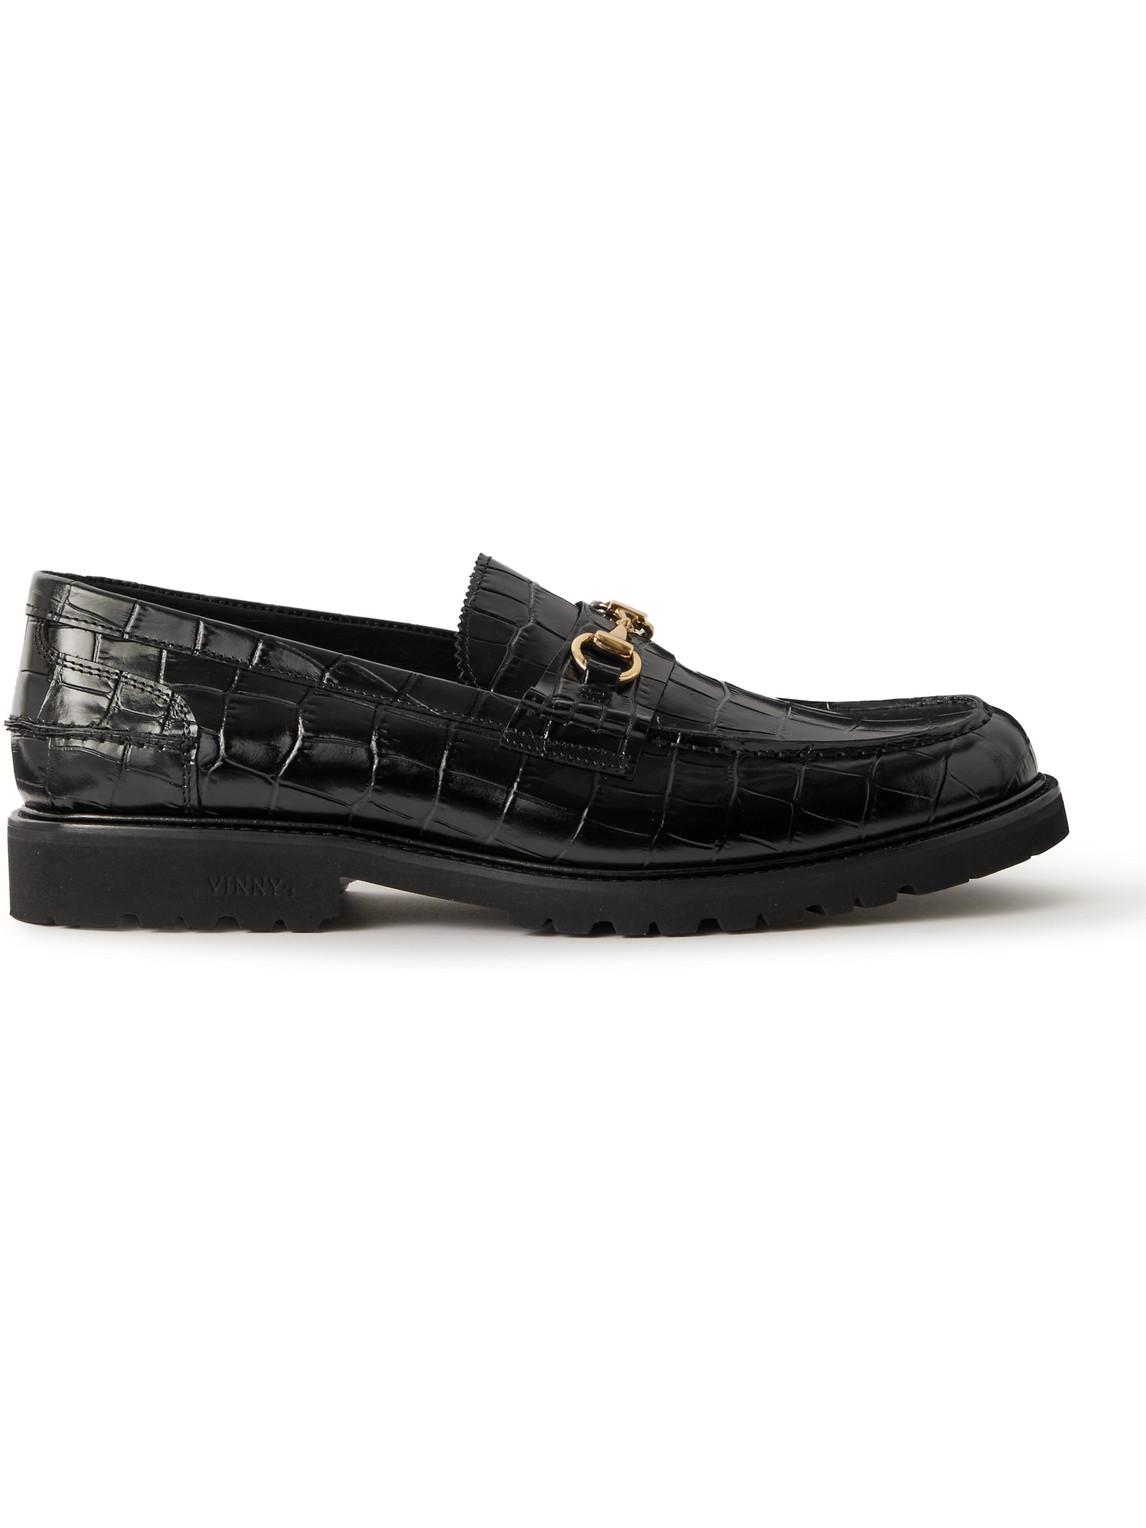 VINNY'S Le Club Horsebit Croc-effect Leather Loafers in Black for Men | Lyst